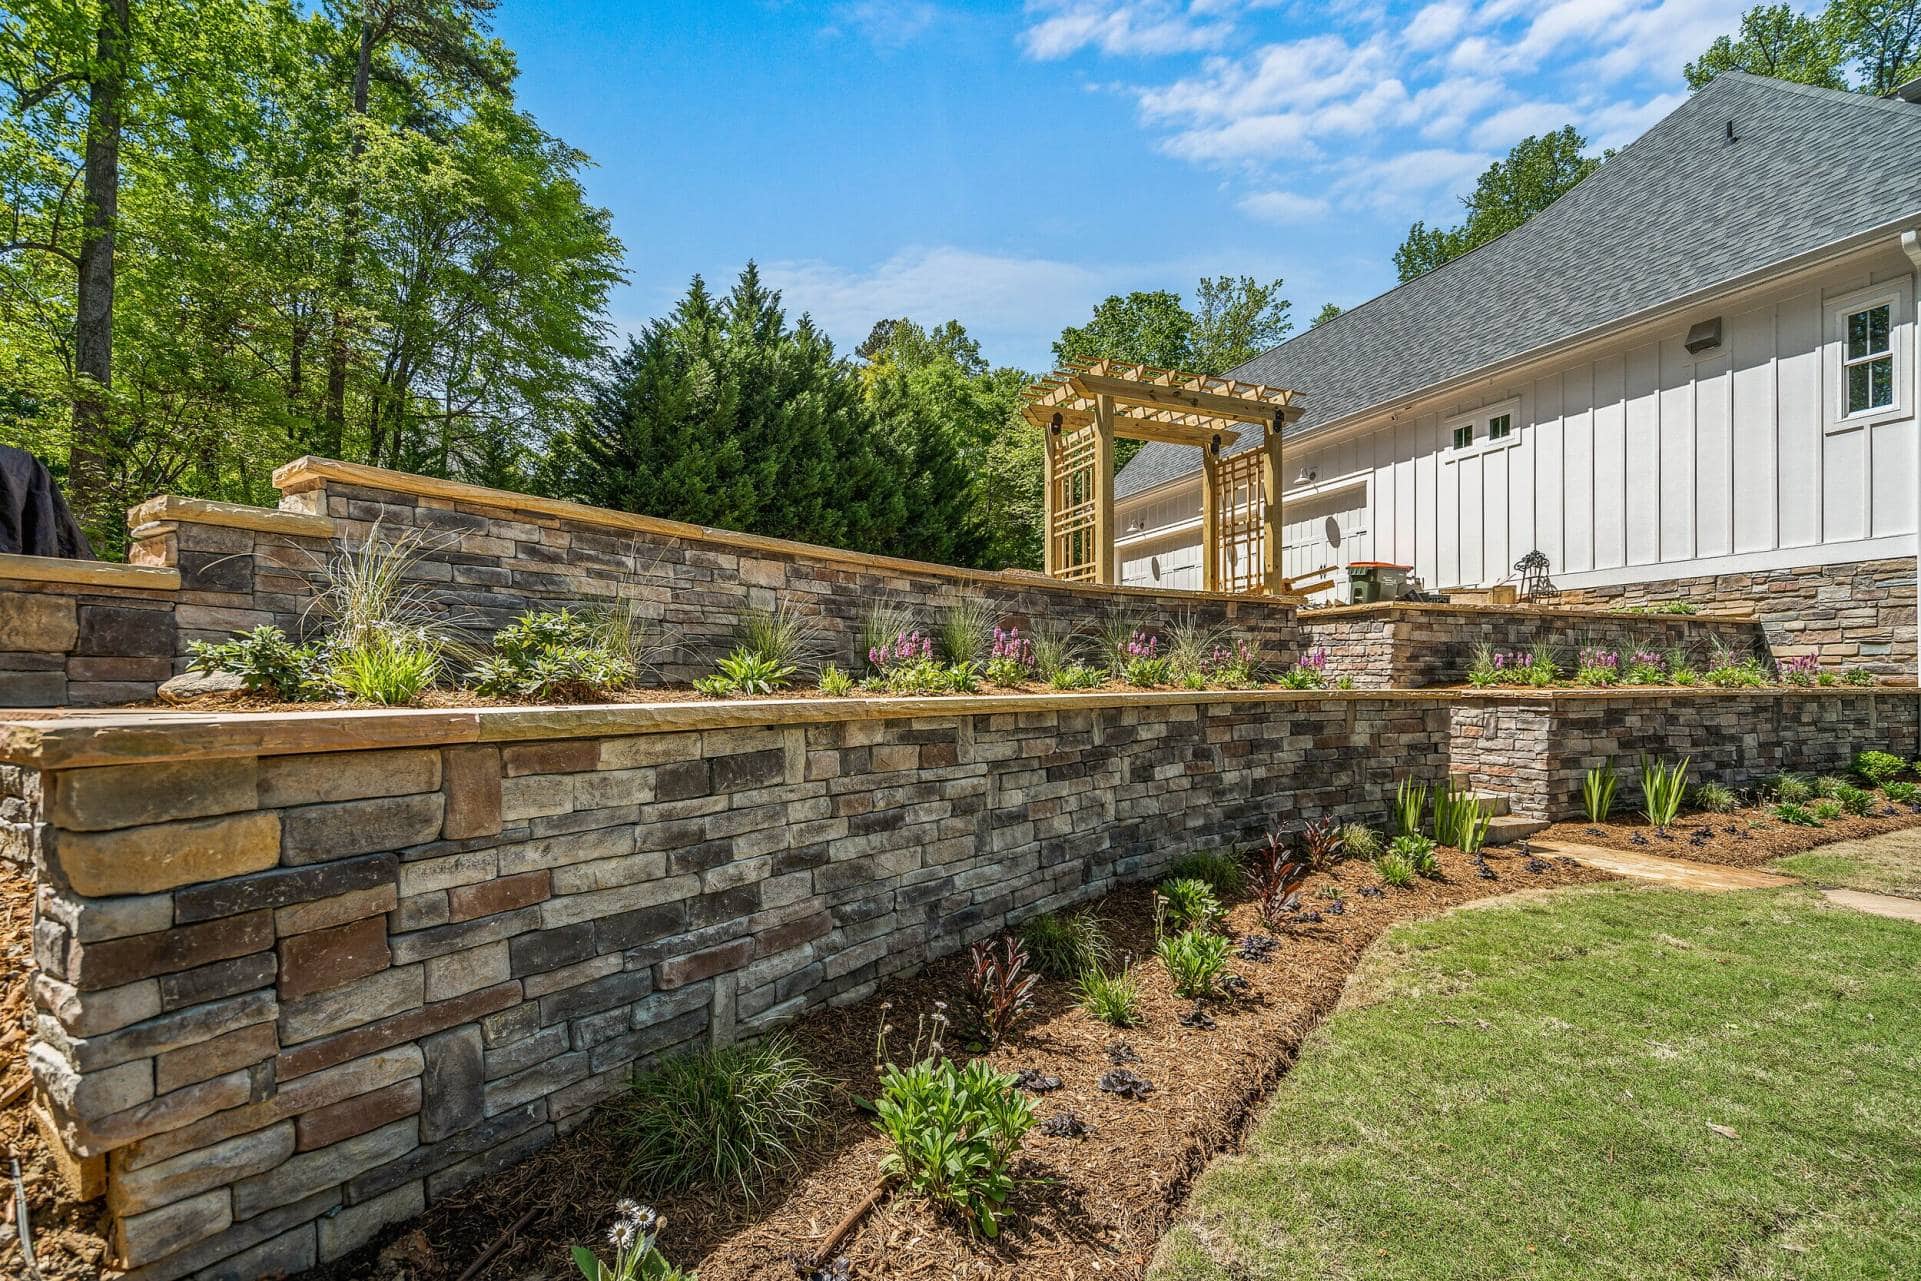 SouthernCut retaining wall with pergola